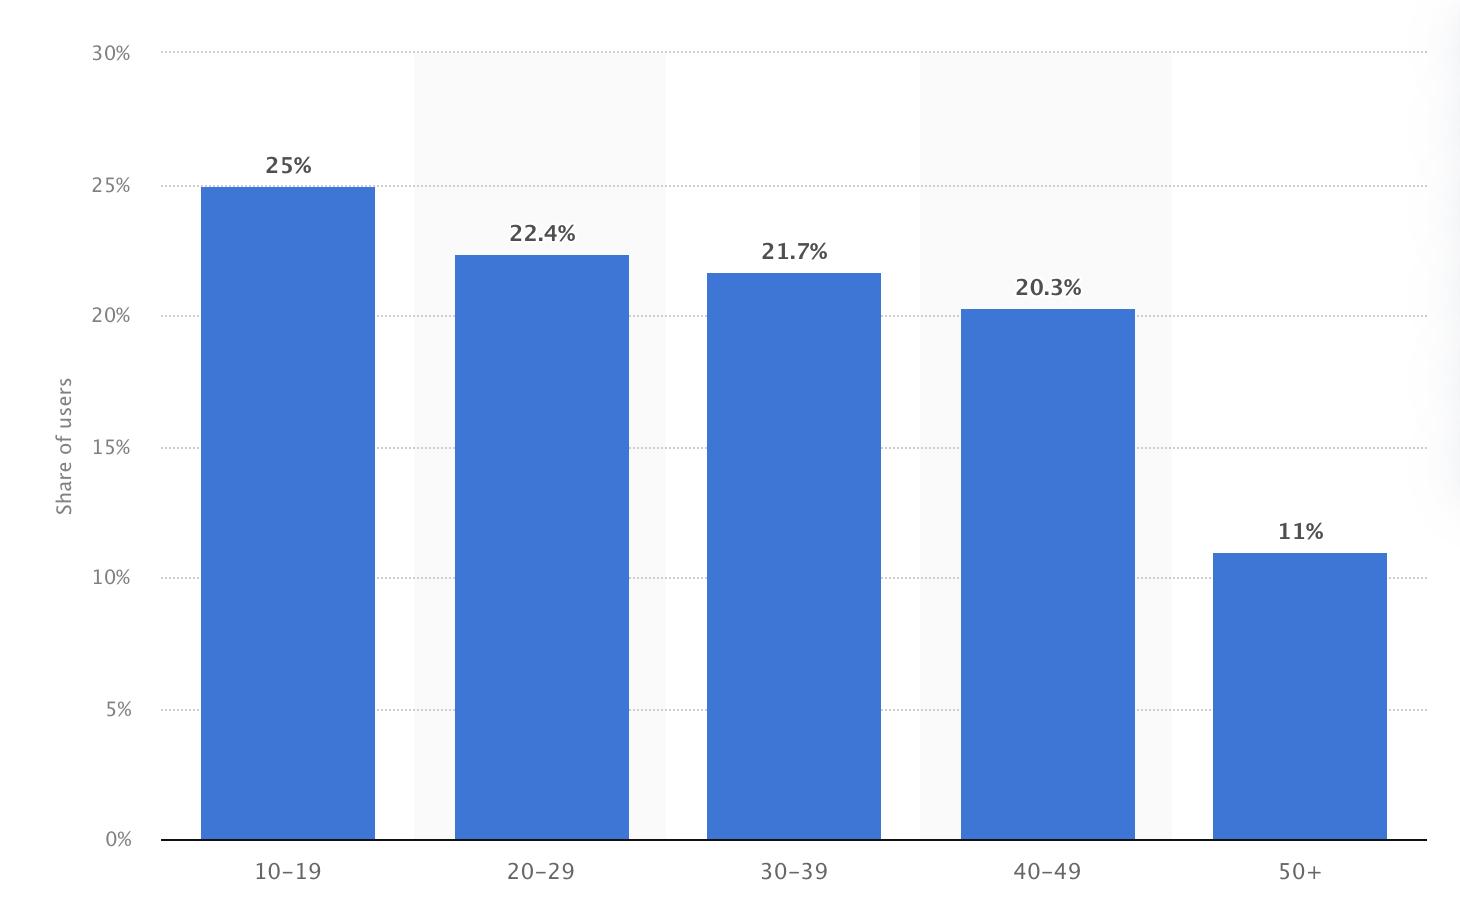 Distribution of TikTok users in the United States as of September 2021, by age group.
10-19 =25%, 20-29=22.4%, 30-39=21.7%, 40-49=20.3%, 50+=11%